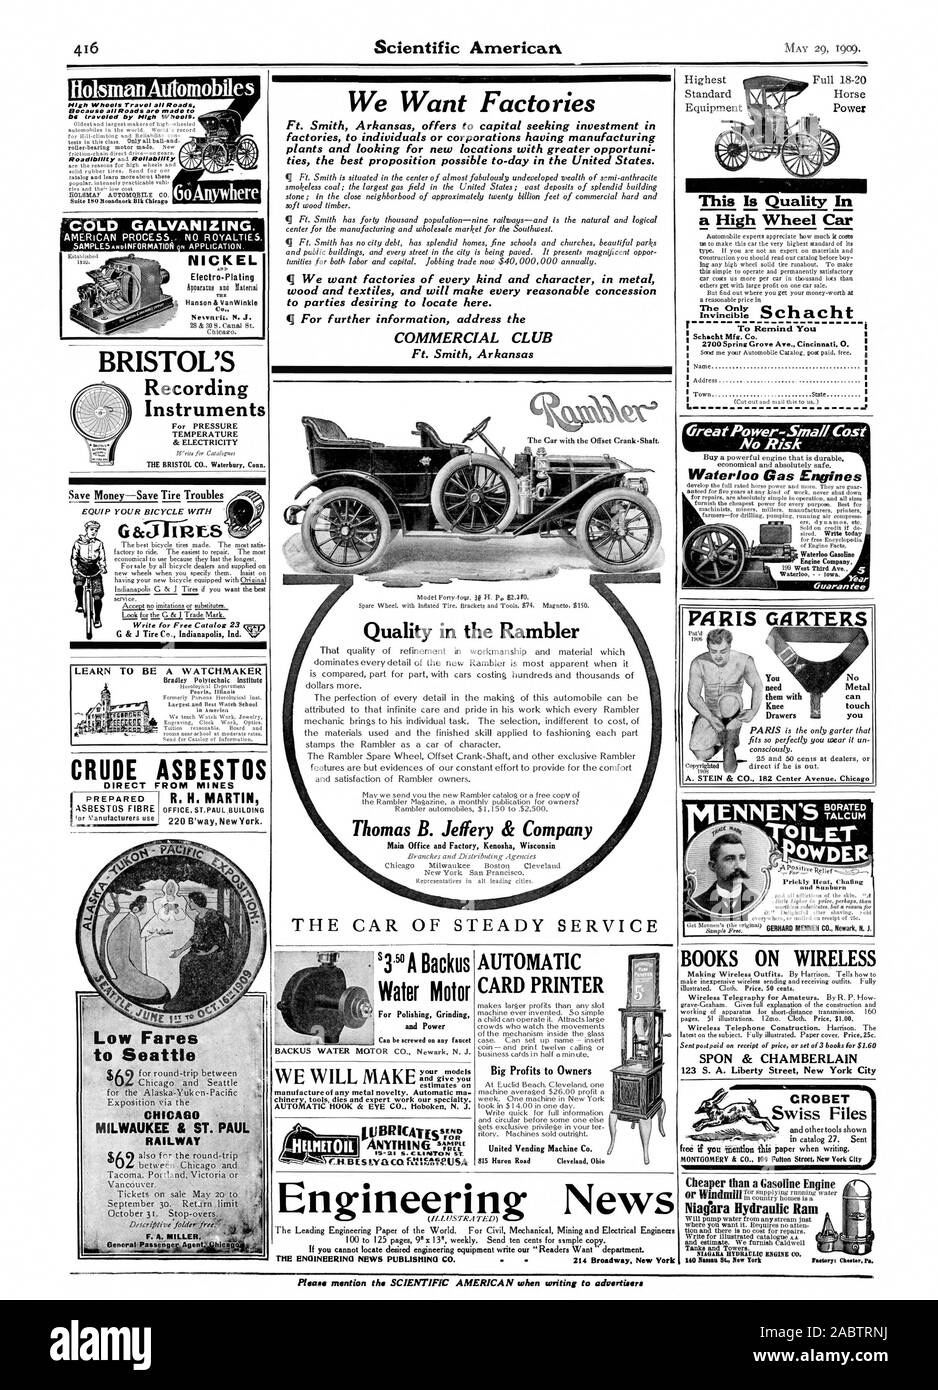 flolsmanAutomobiles Nigh Wheels Travel all Roads Because all Roads are made to be traveled by HIV WheelS. COLD GALVANIZING. AMERICAN PROCESS. NO ROYALTIES SAMPLES ANDINFORMATIOA .N APPLICATION. NICKEL SHE BRISTOL'S Recording Instruments GoAnywhere LEARN TO BE A WATCHMAKER CRUDE ASBESTOS EQUIP YOUR BICYCLE WITH GiccirliZES Write for Free Catalog 23 ww PREPARED Highest Power We Want Factories Ft. Smith Arkansas offers to capital seeking investment in factories to individuals or corporations having manufacturing plants and looking for new locations with greater opportuni ties the best proposition Stock Photo